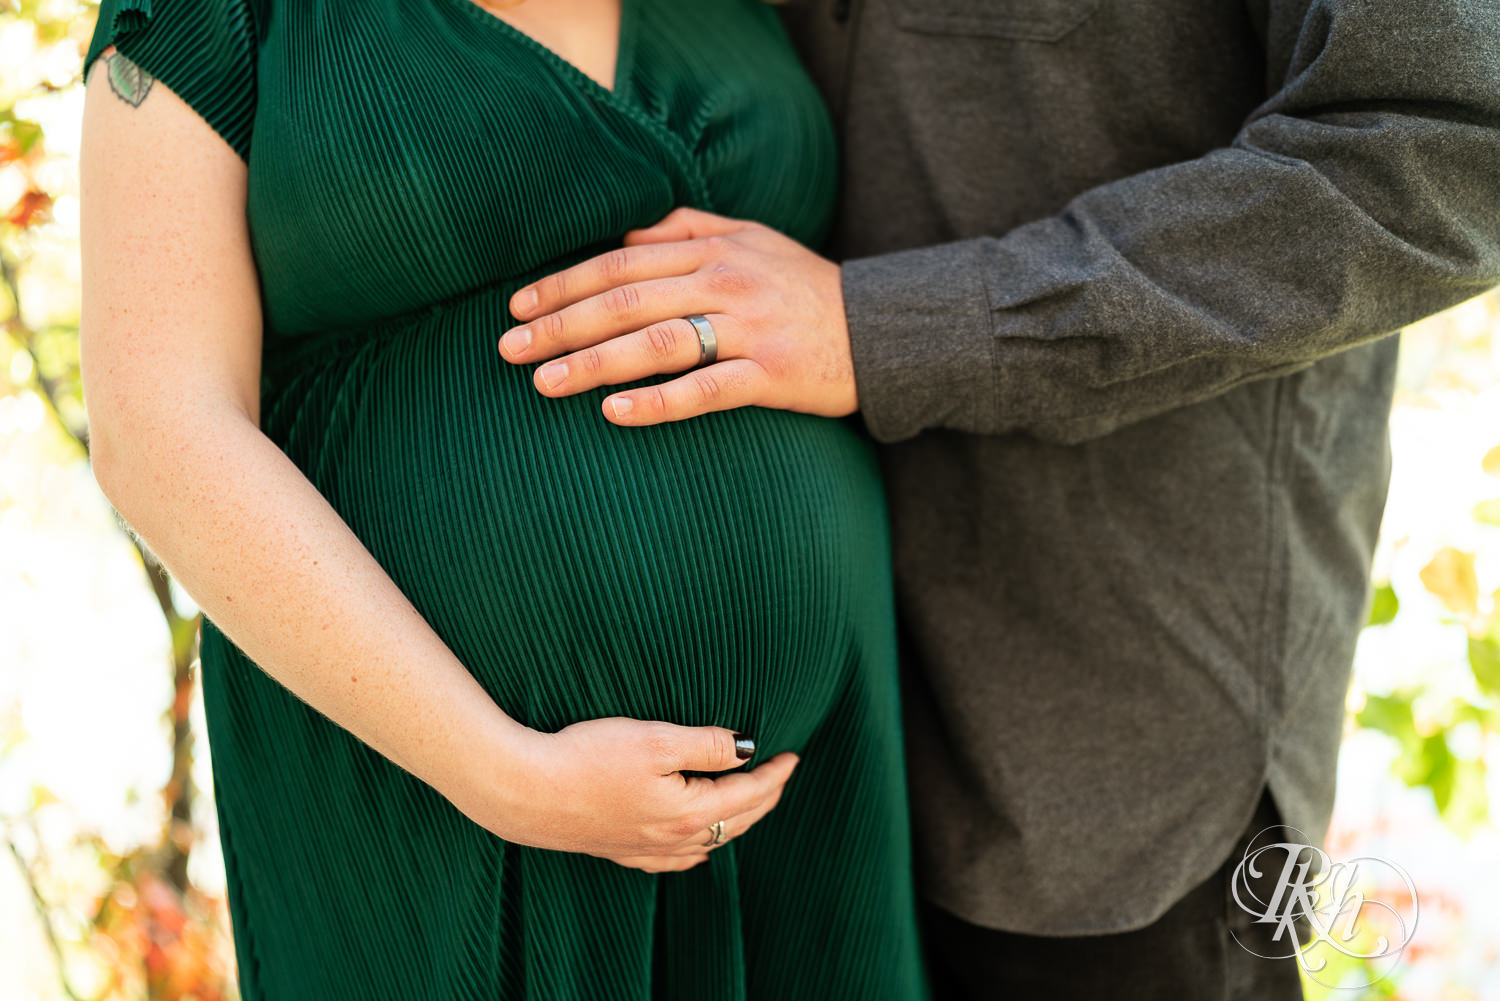 Pregnant woman in green dress and man hold belly in Lebanon Hills Regional Park in Eagan, Minnesota.